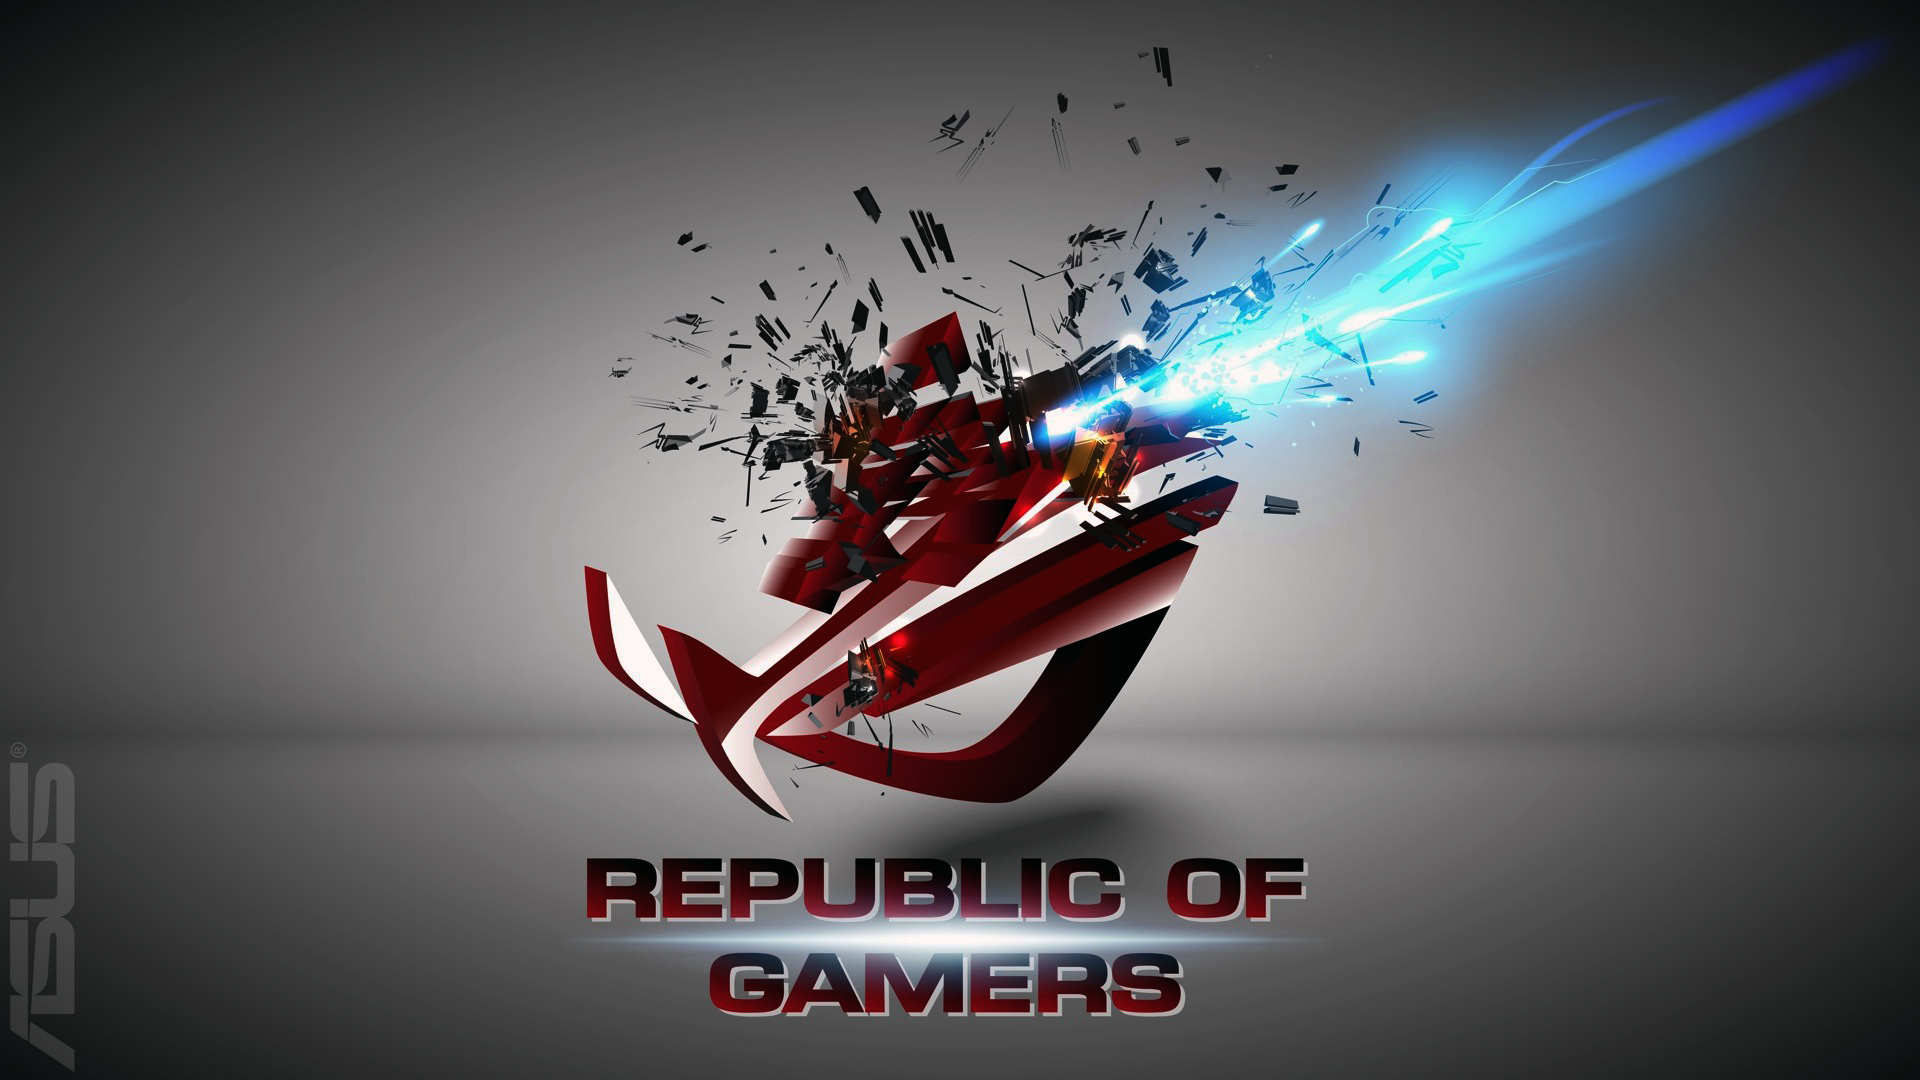 Asus Rog Republic Of Gamers Logo Shattered Explosion HD